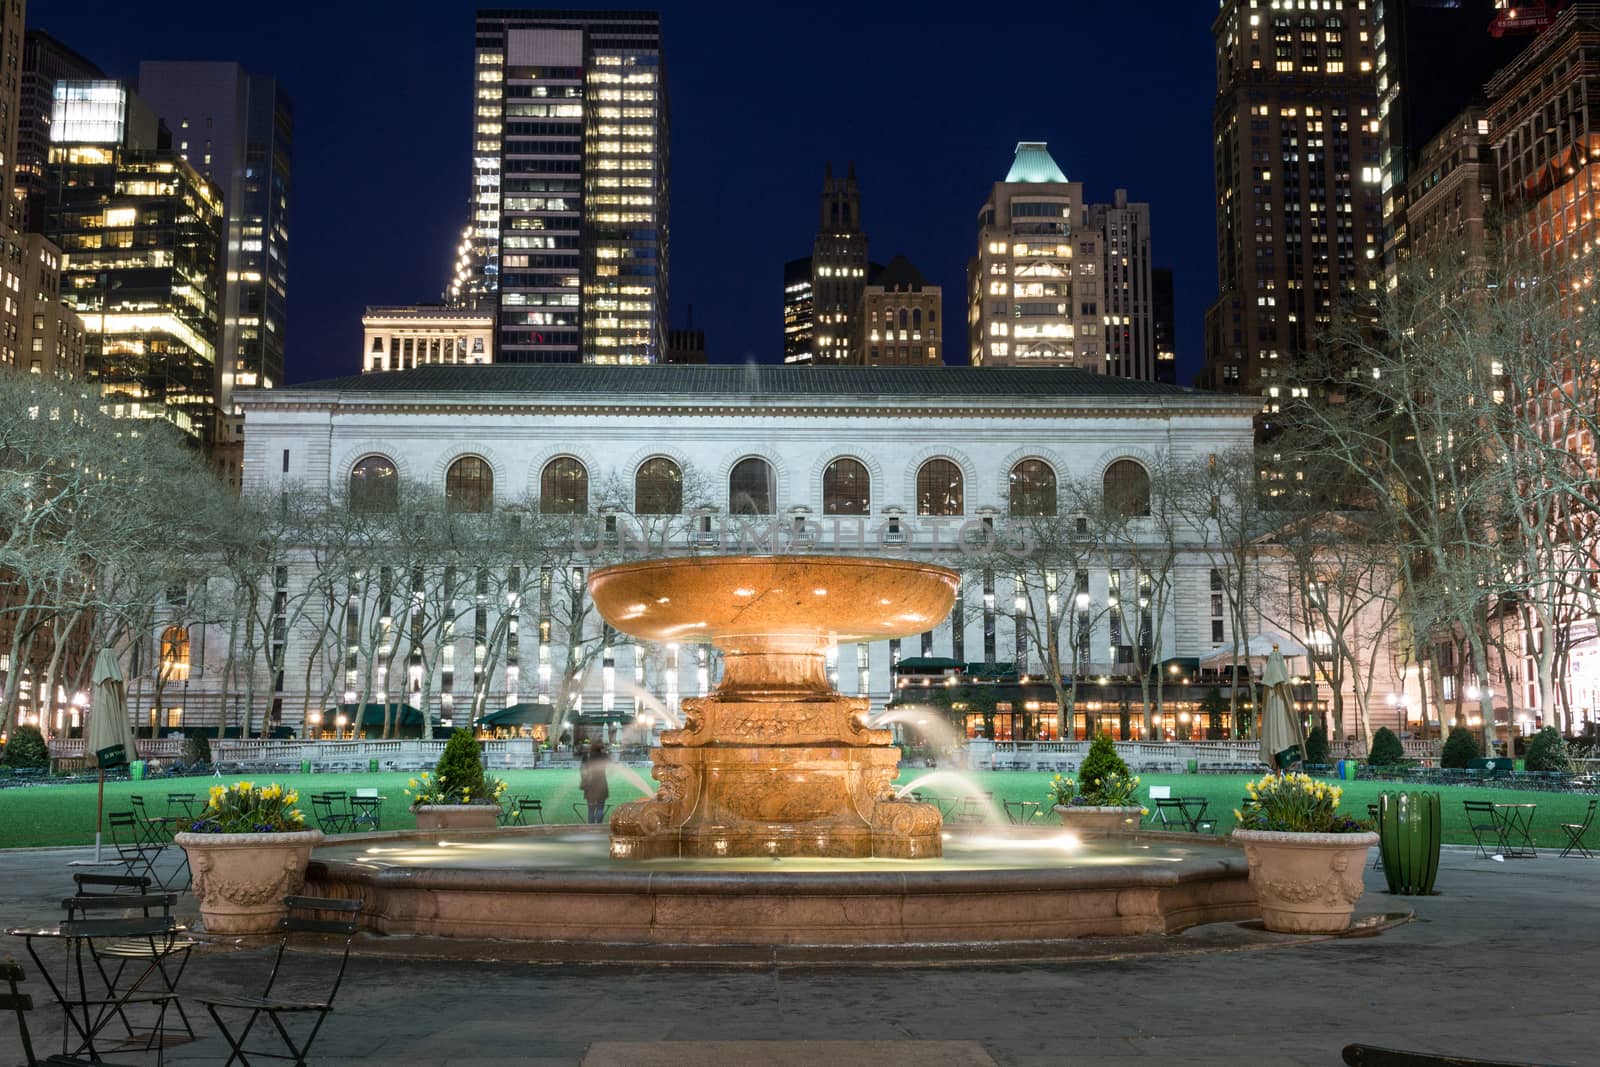 Bryant Park is located in Manhattan (NYC) between 5th and 6th avenue and 42nd street